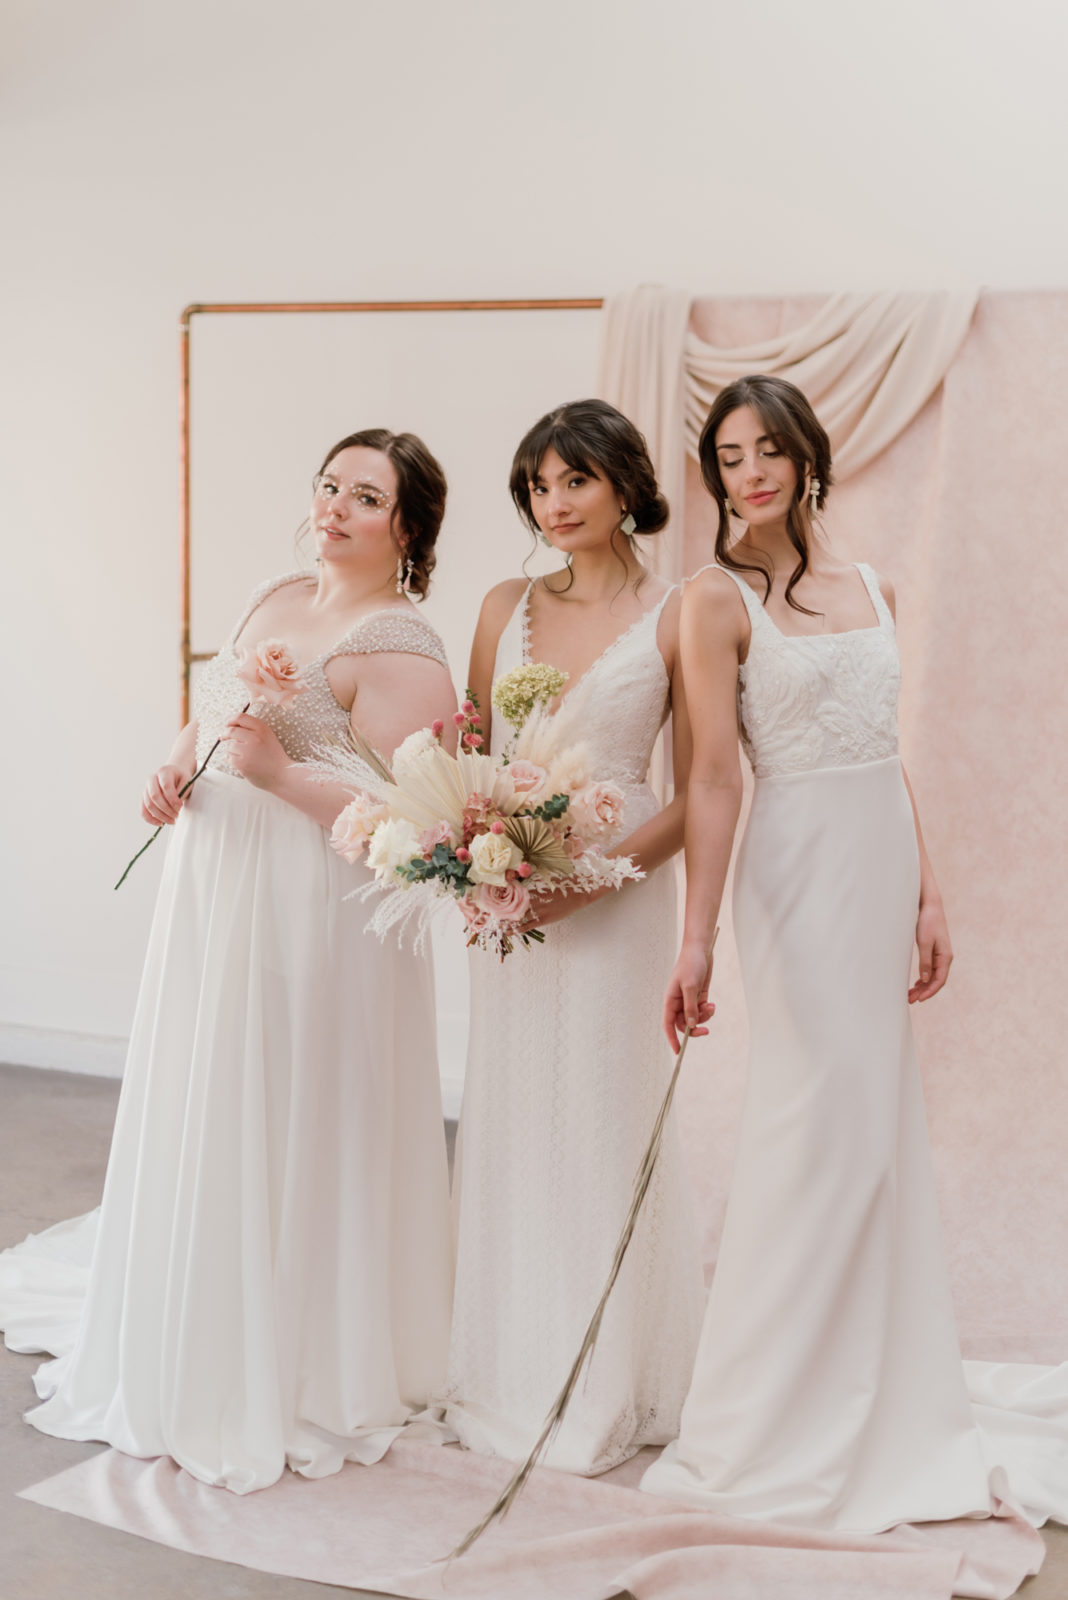 Three models pose in front of a renaissance inspired backdrop wearing wedding dresses from Lovenote Bride's newest collection